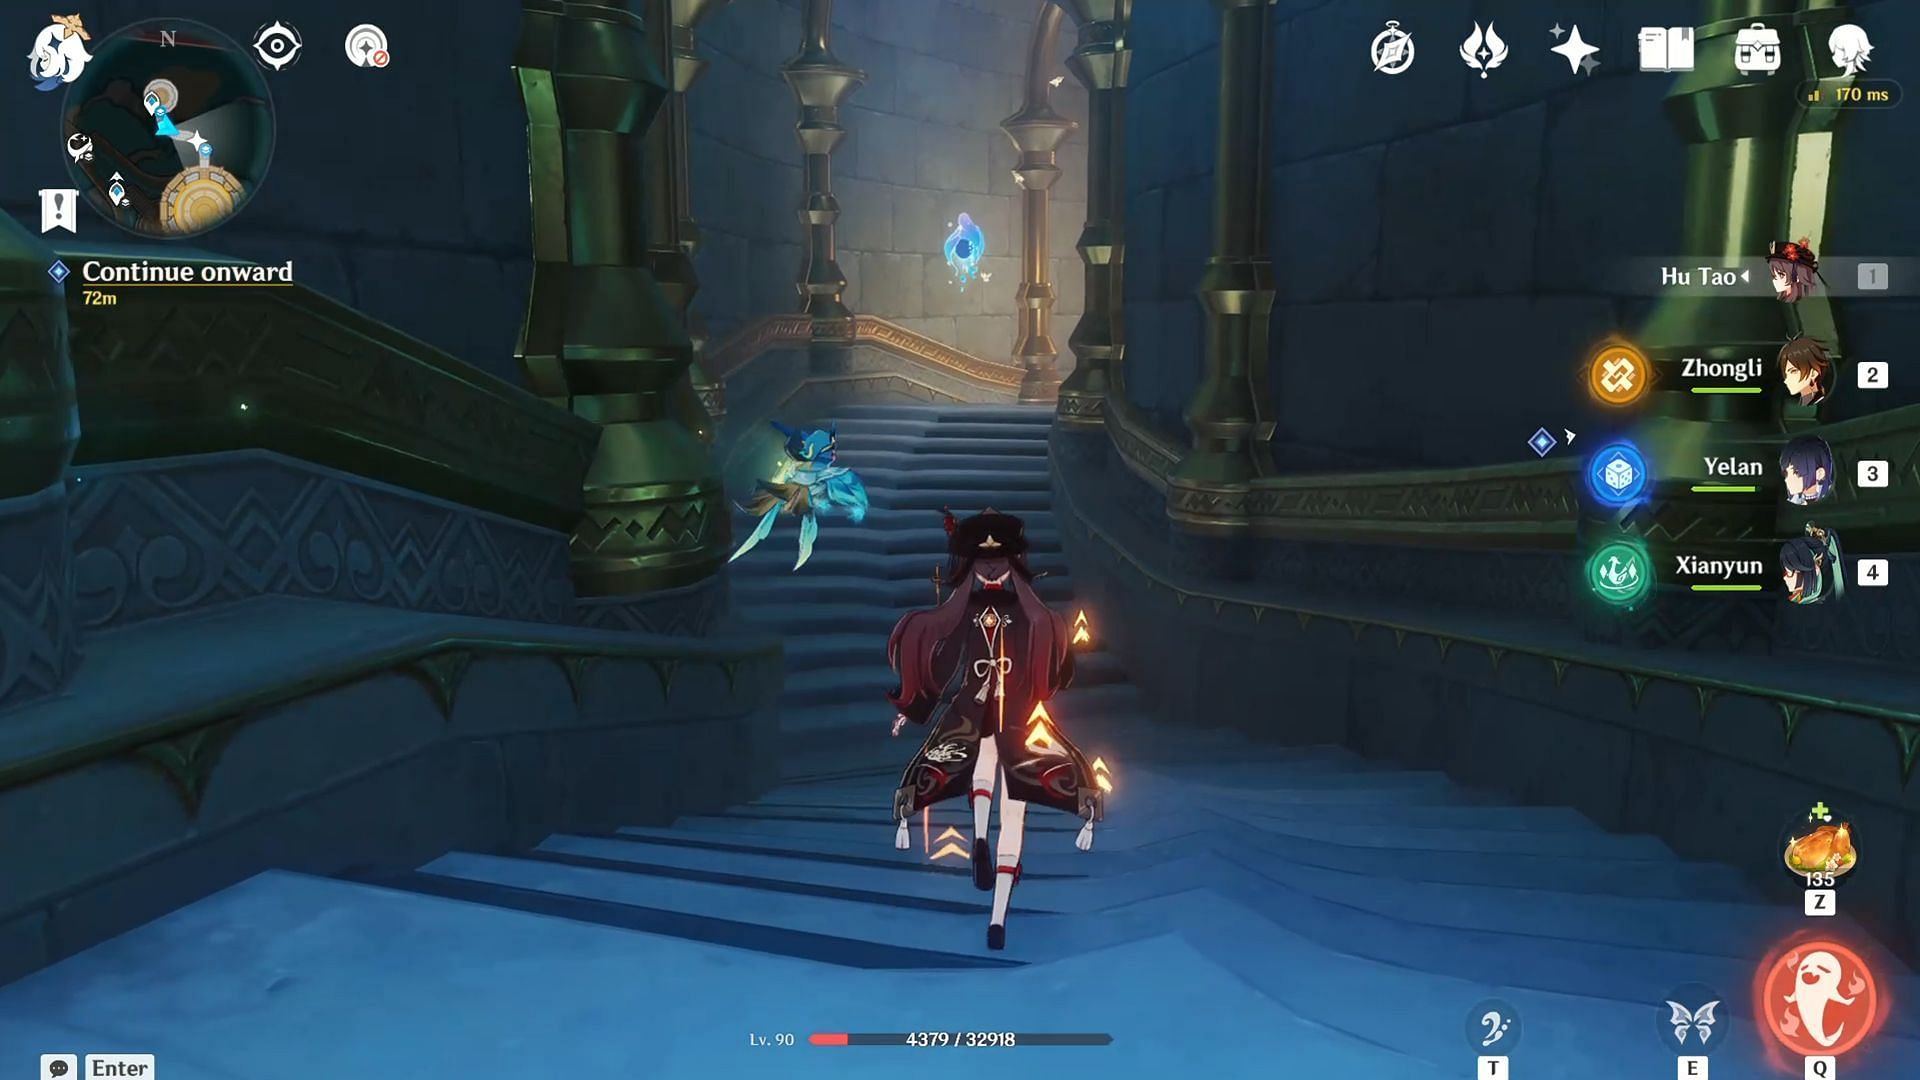 Hydroculus is on the stairs (Image via HoYoverse)